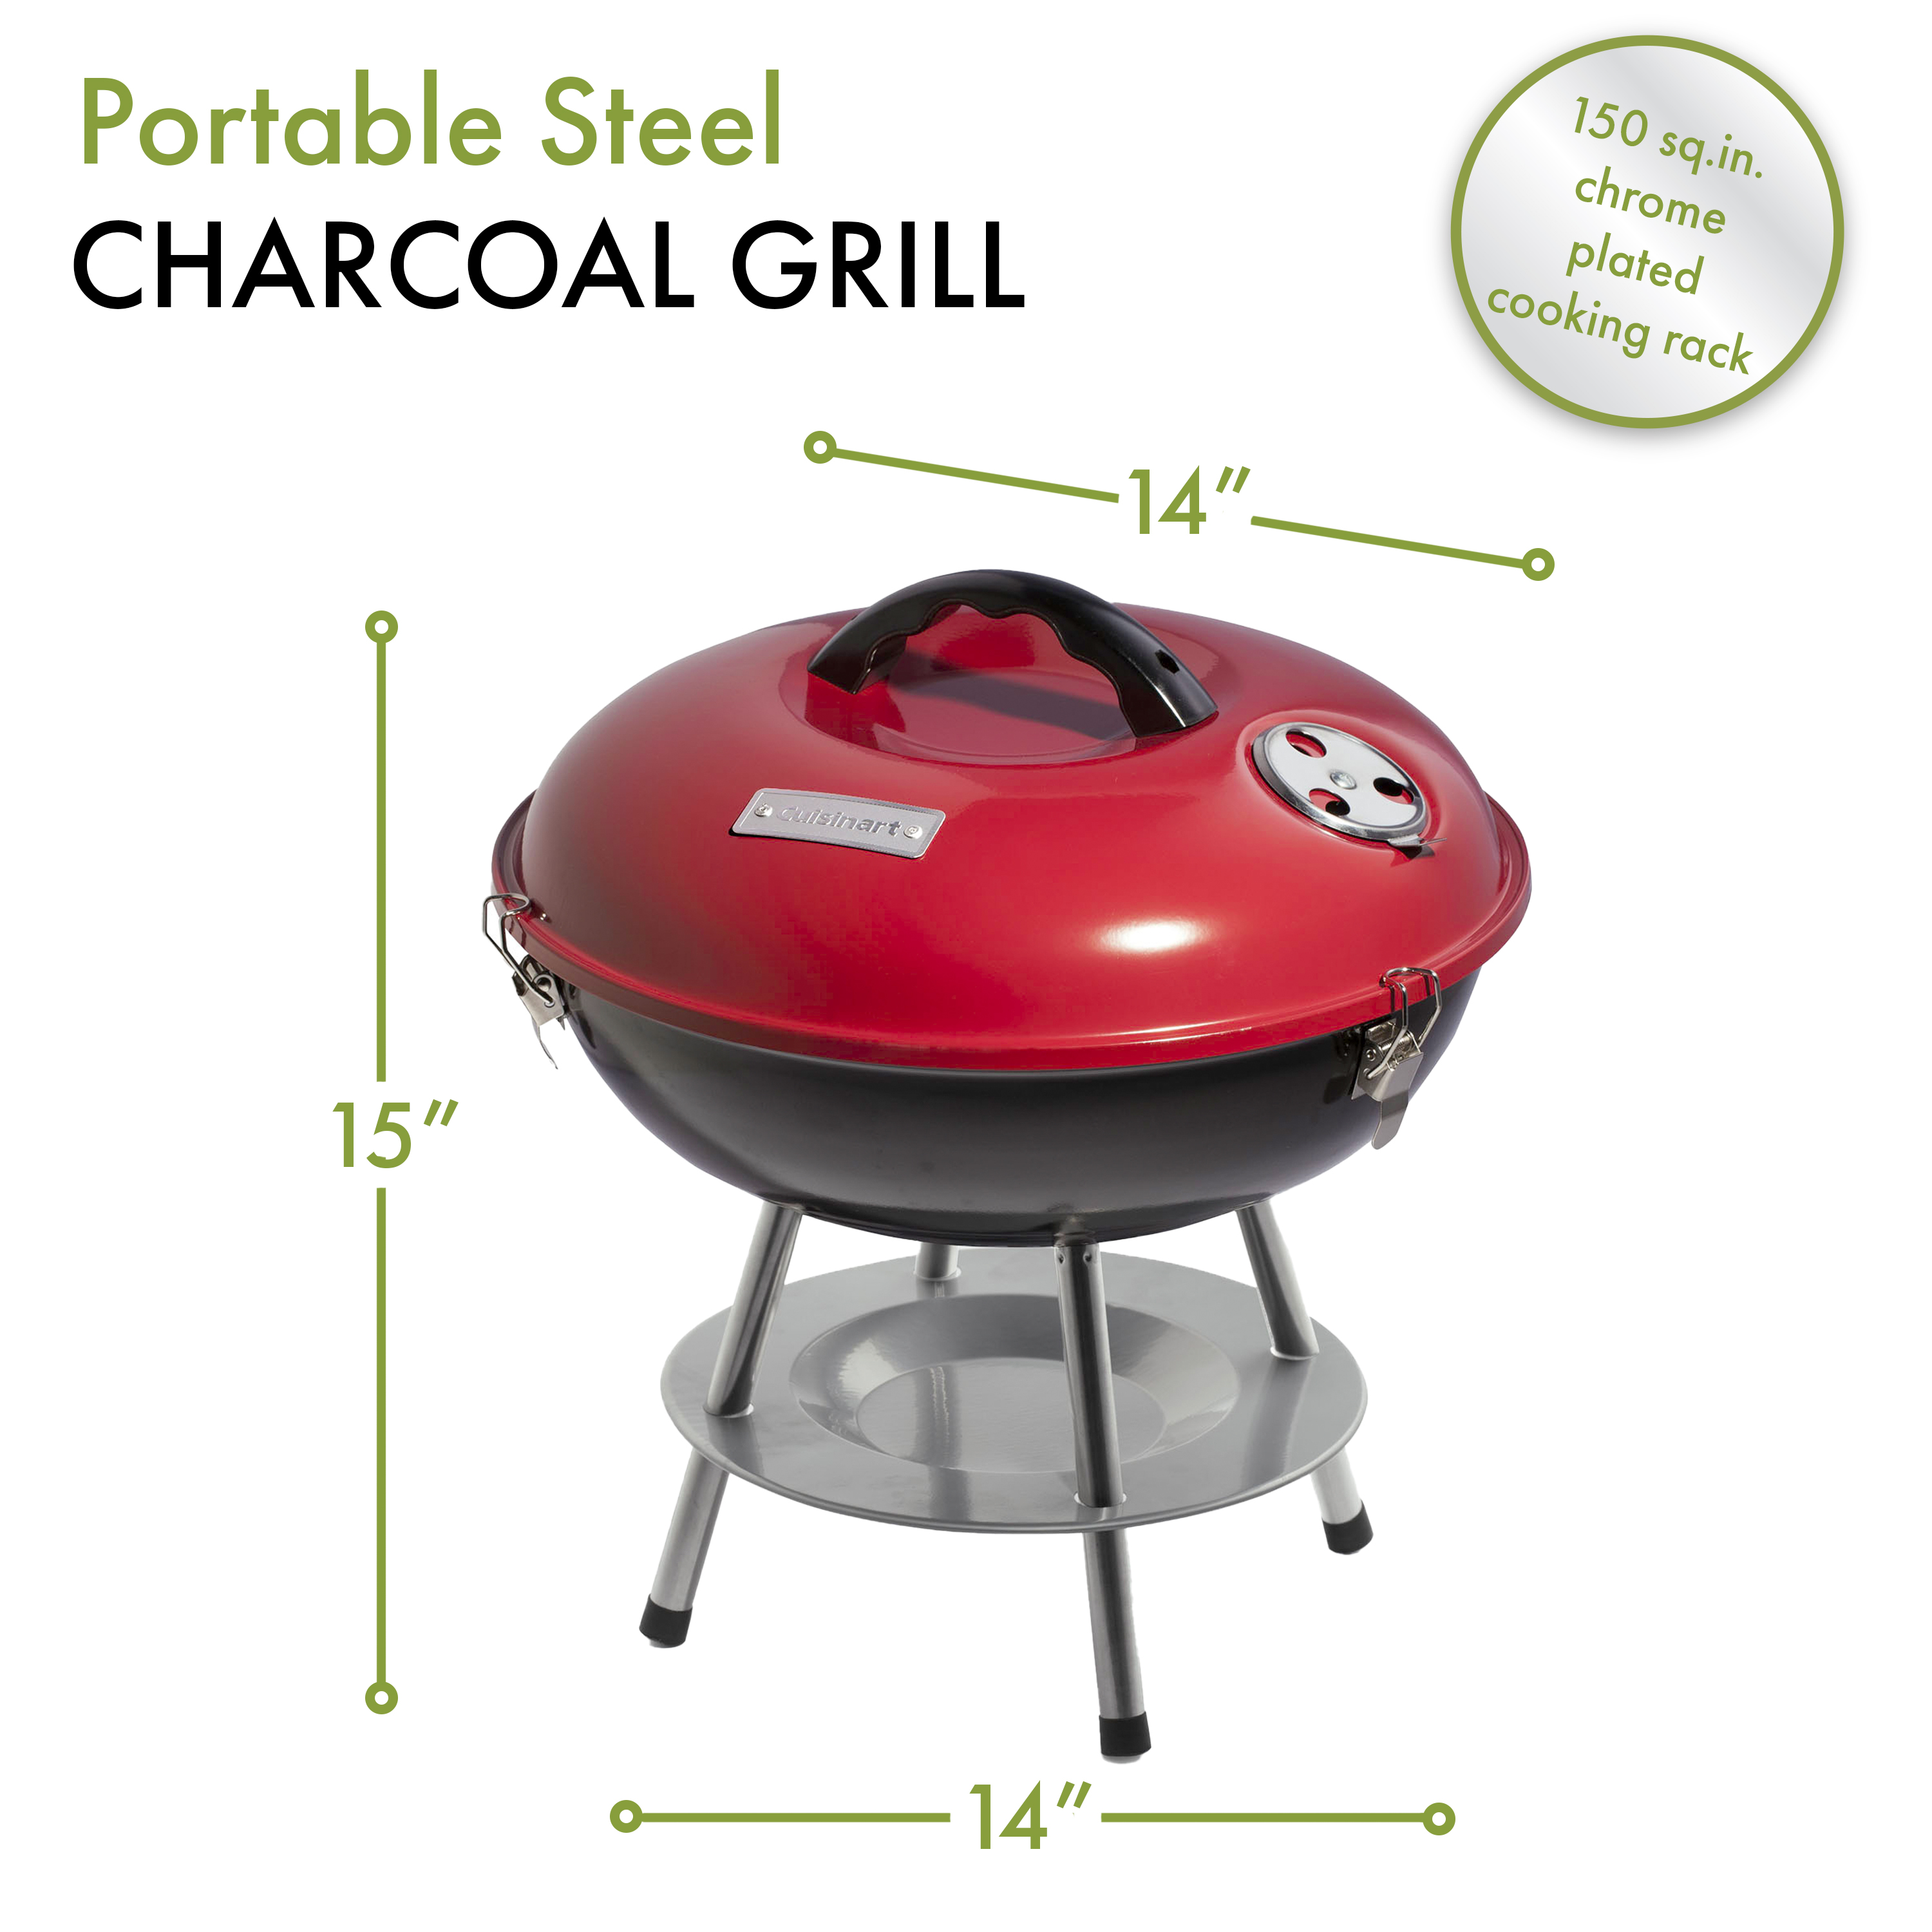 Cuisinart 14" Portable Charcoal Grill - image 3 of 3